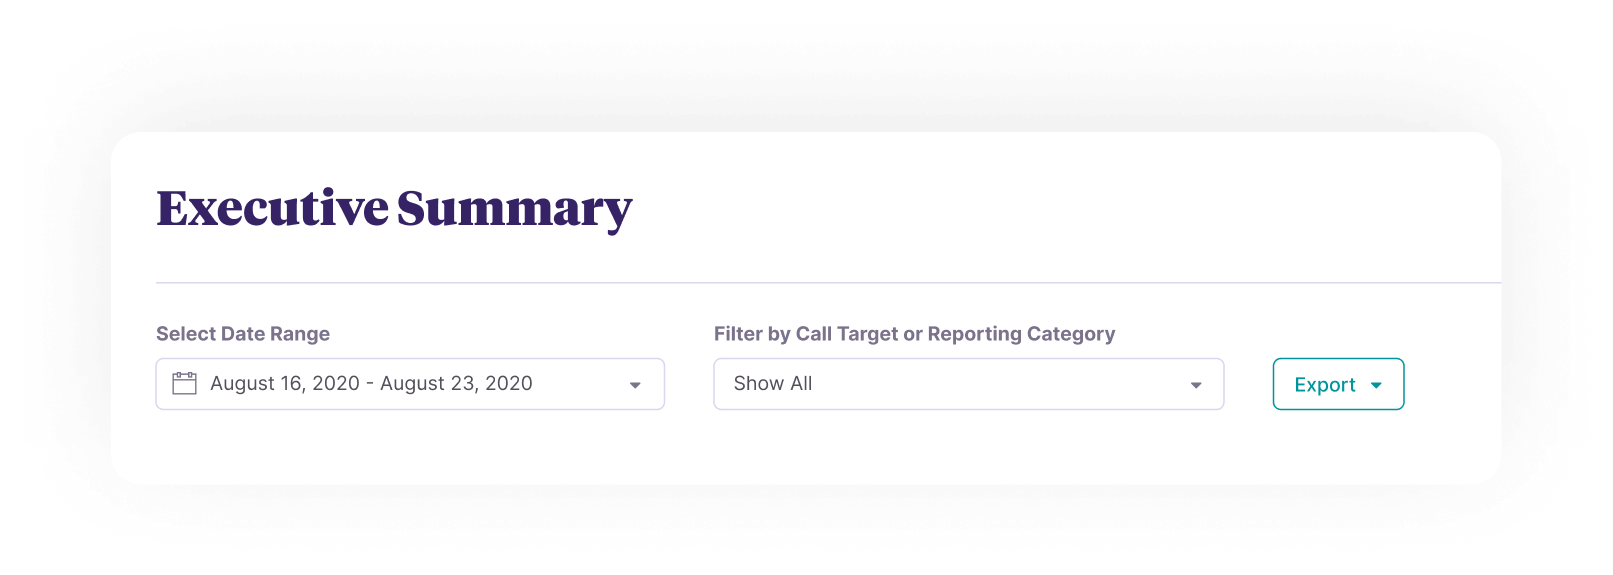 You can filter specific dates and call targets to get a customized view of Mindful's Executive Summary